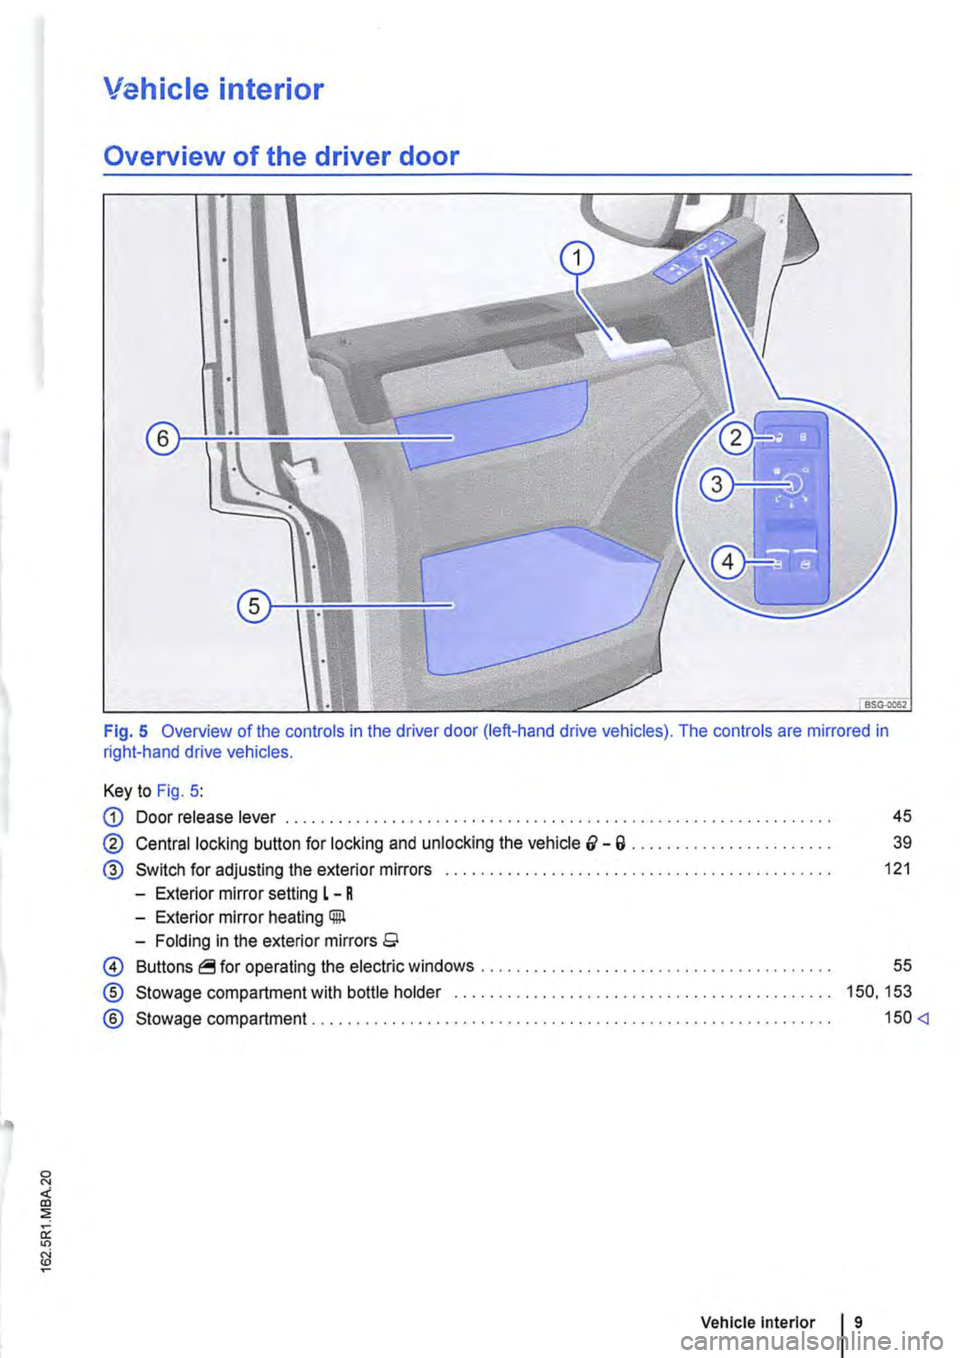 VOLKSWAGEN TRANSPORTER 2010  Owners Manual Vehicle interior 
Overview of the driver door 
Fig. 5 Overview of the controls in the driver door (left-hand drive vehicles). The controls are mirrored in right-hand drive vehicles. 
Key to Fig. 5: 
G